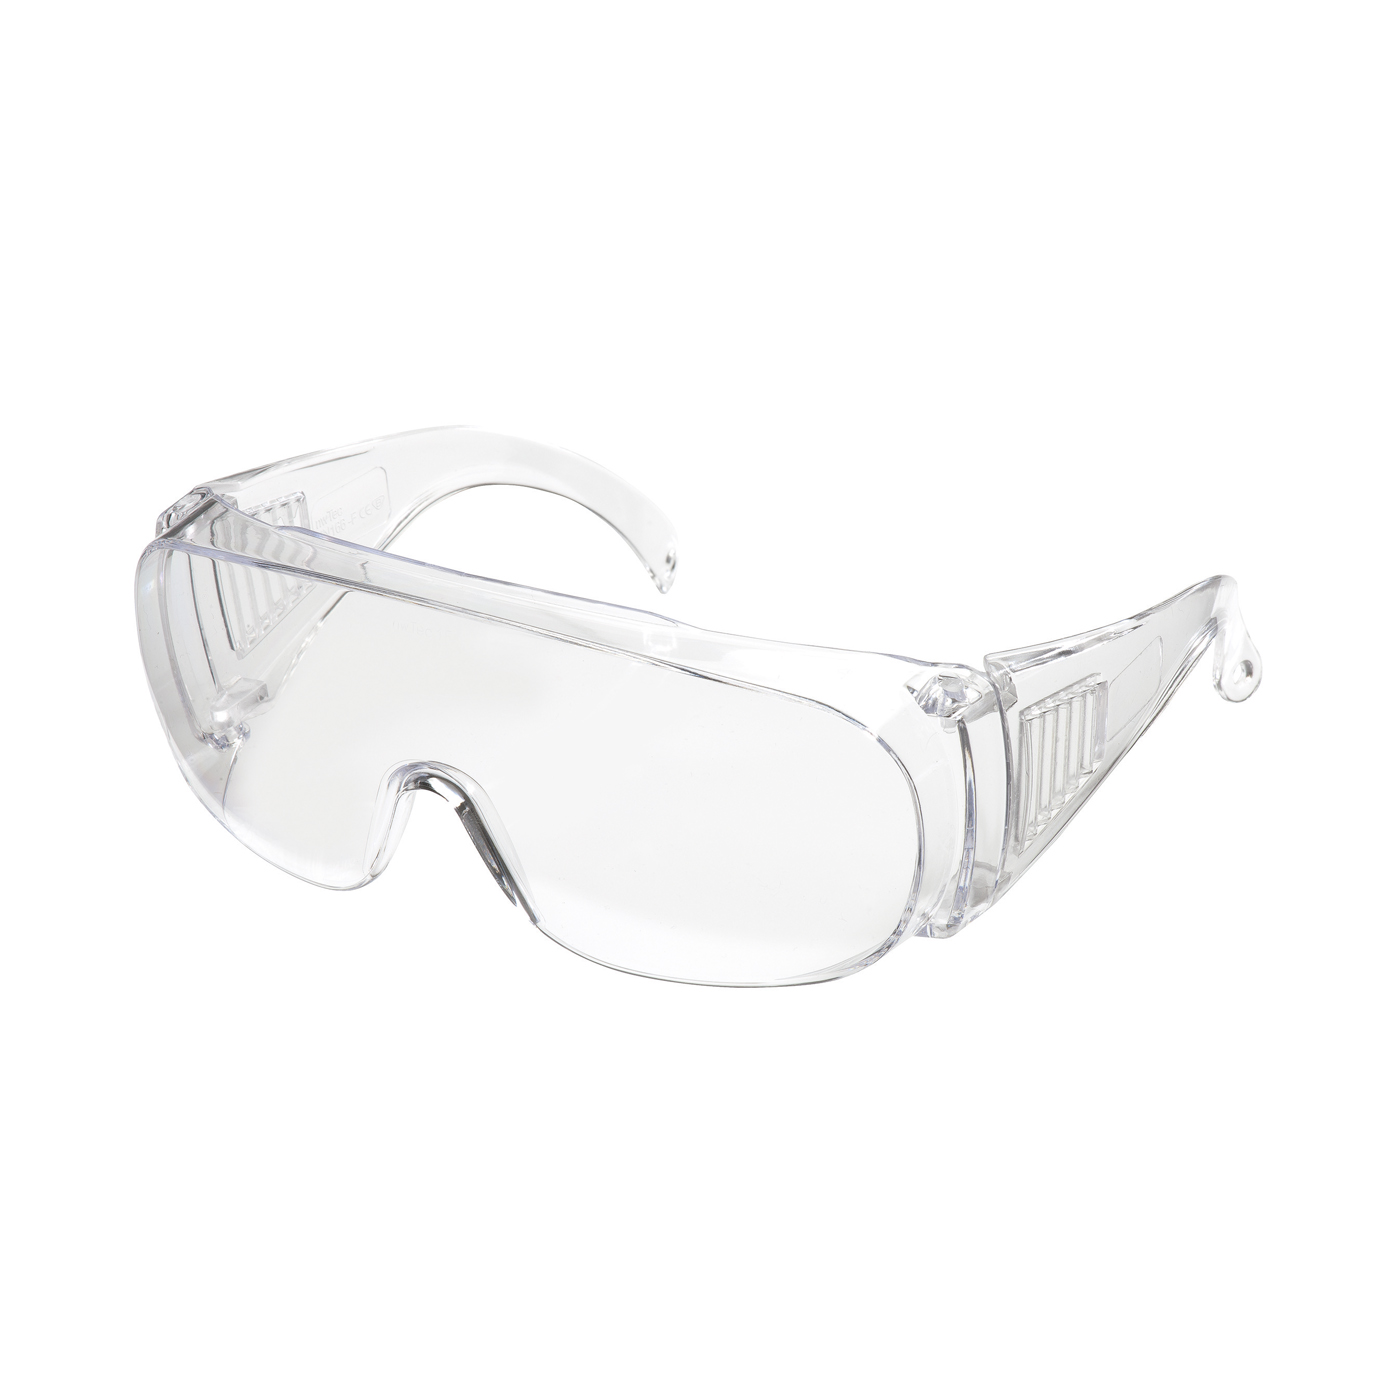 Protective Goggles - 1 piece